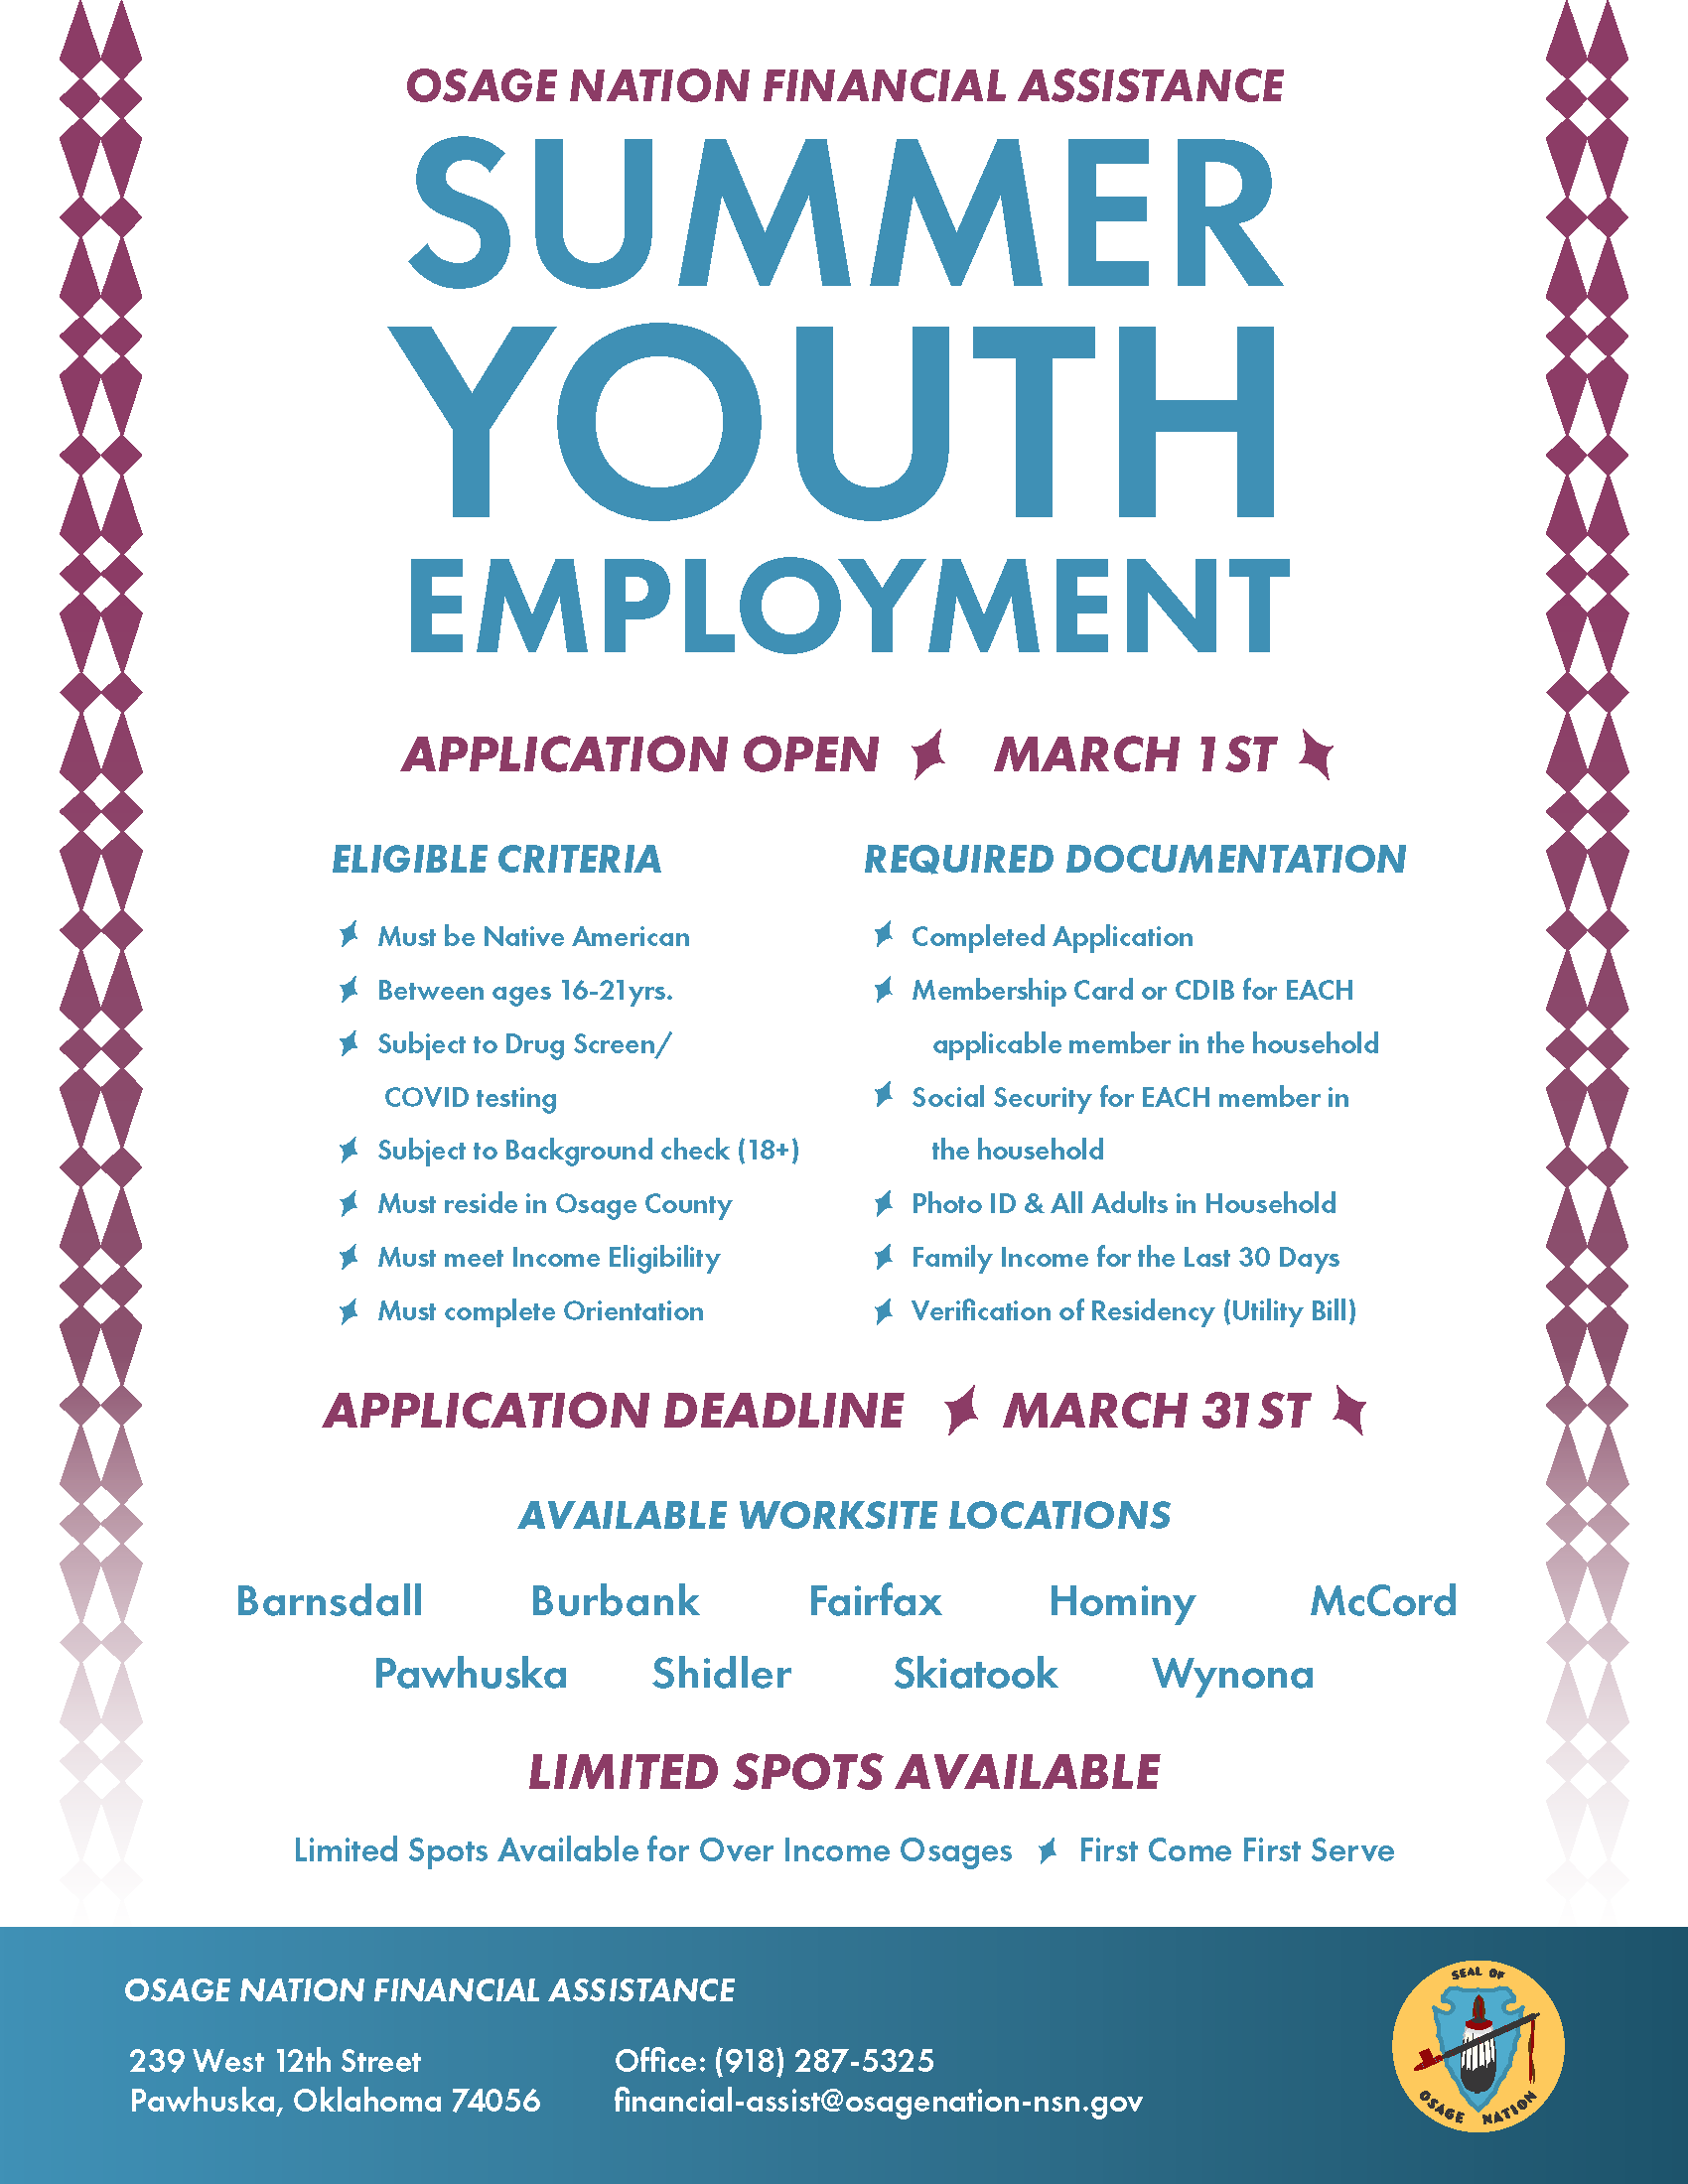 ONFA Summer Youth Employment Osage Nation